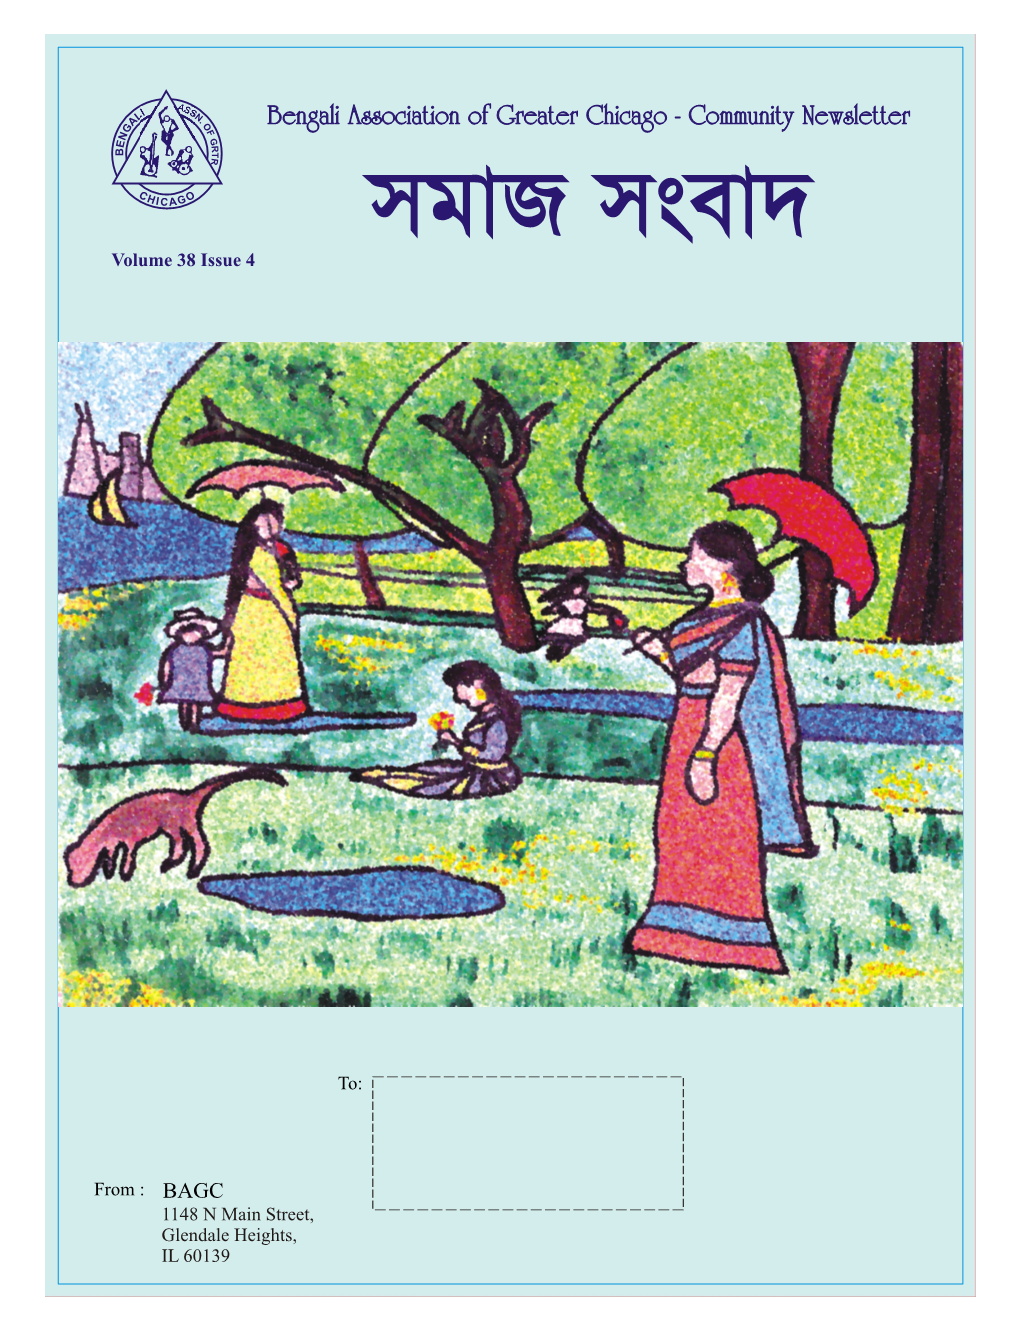 News Letter Vol 38 (Issue 4), 2013